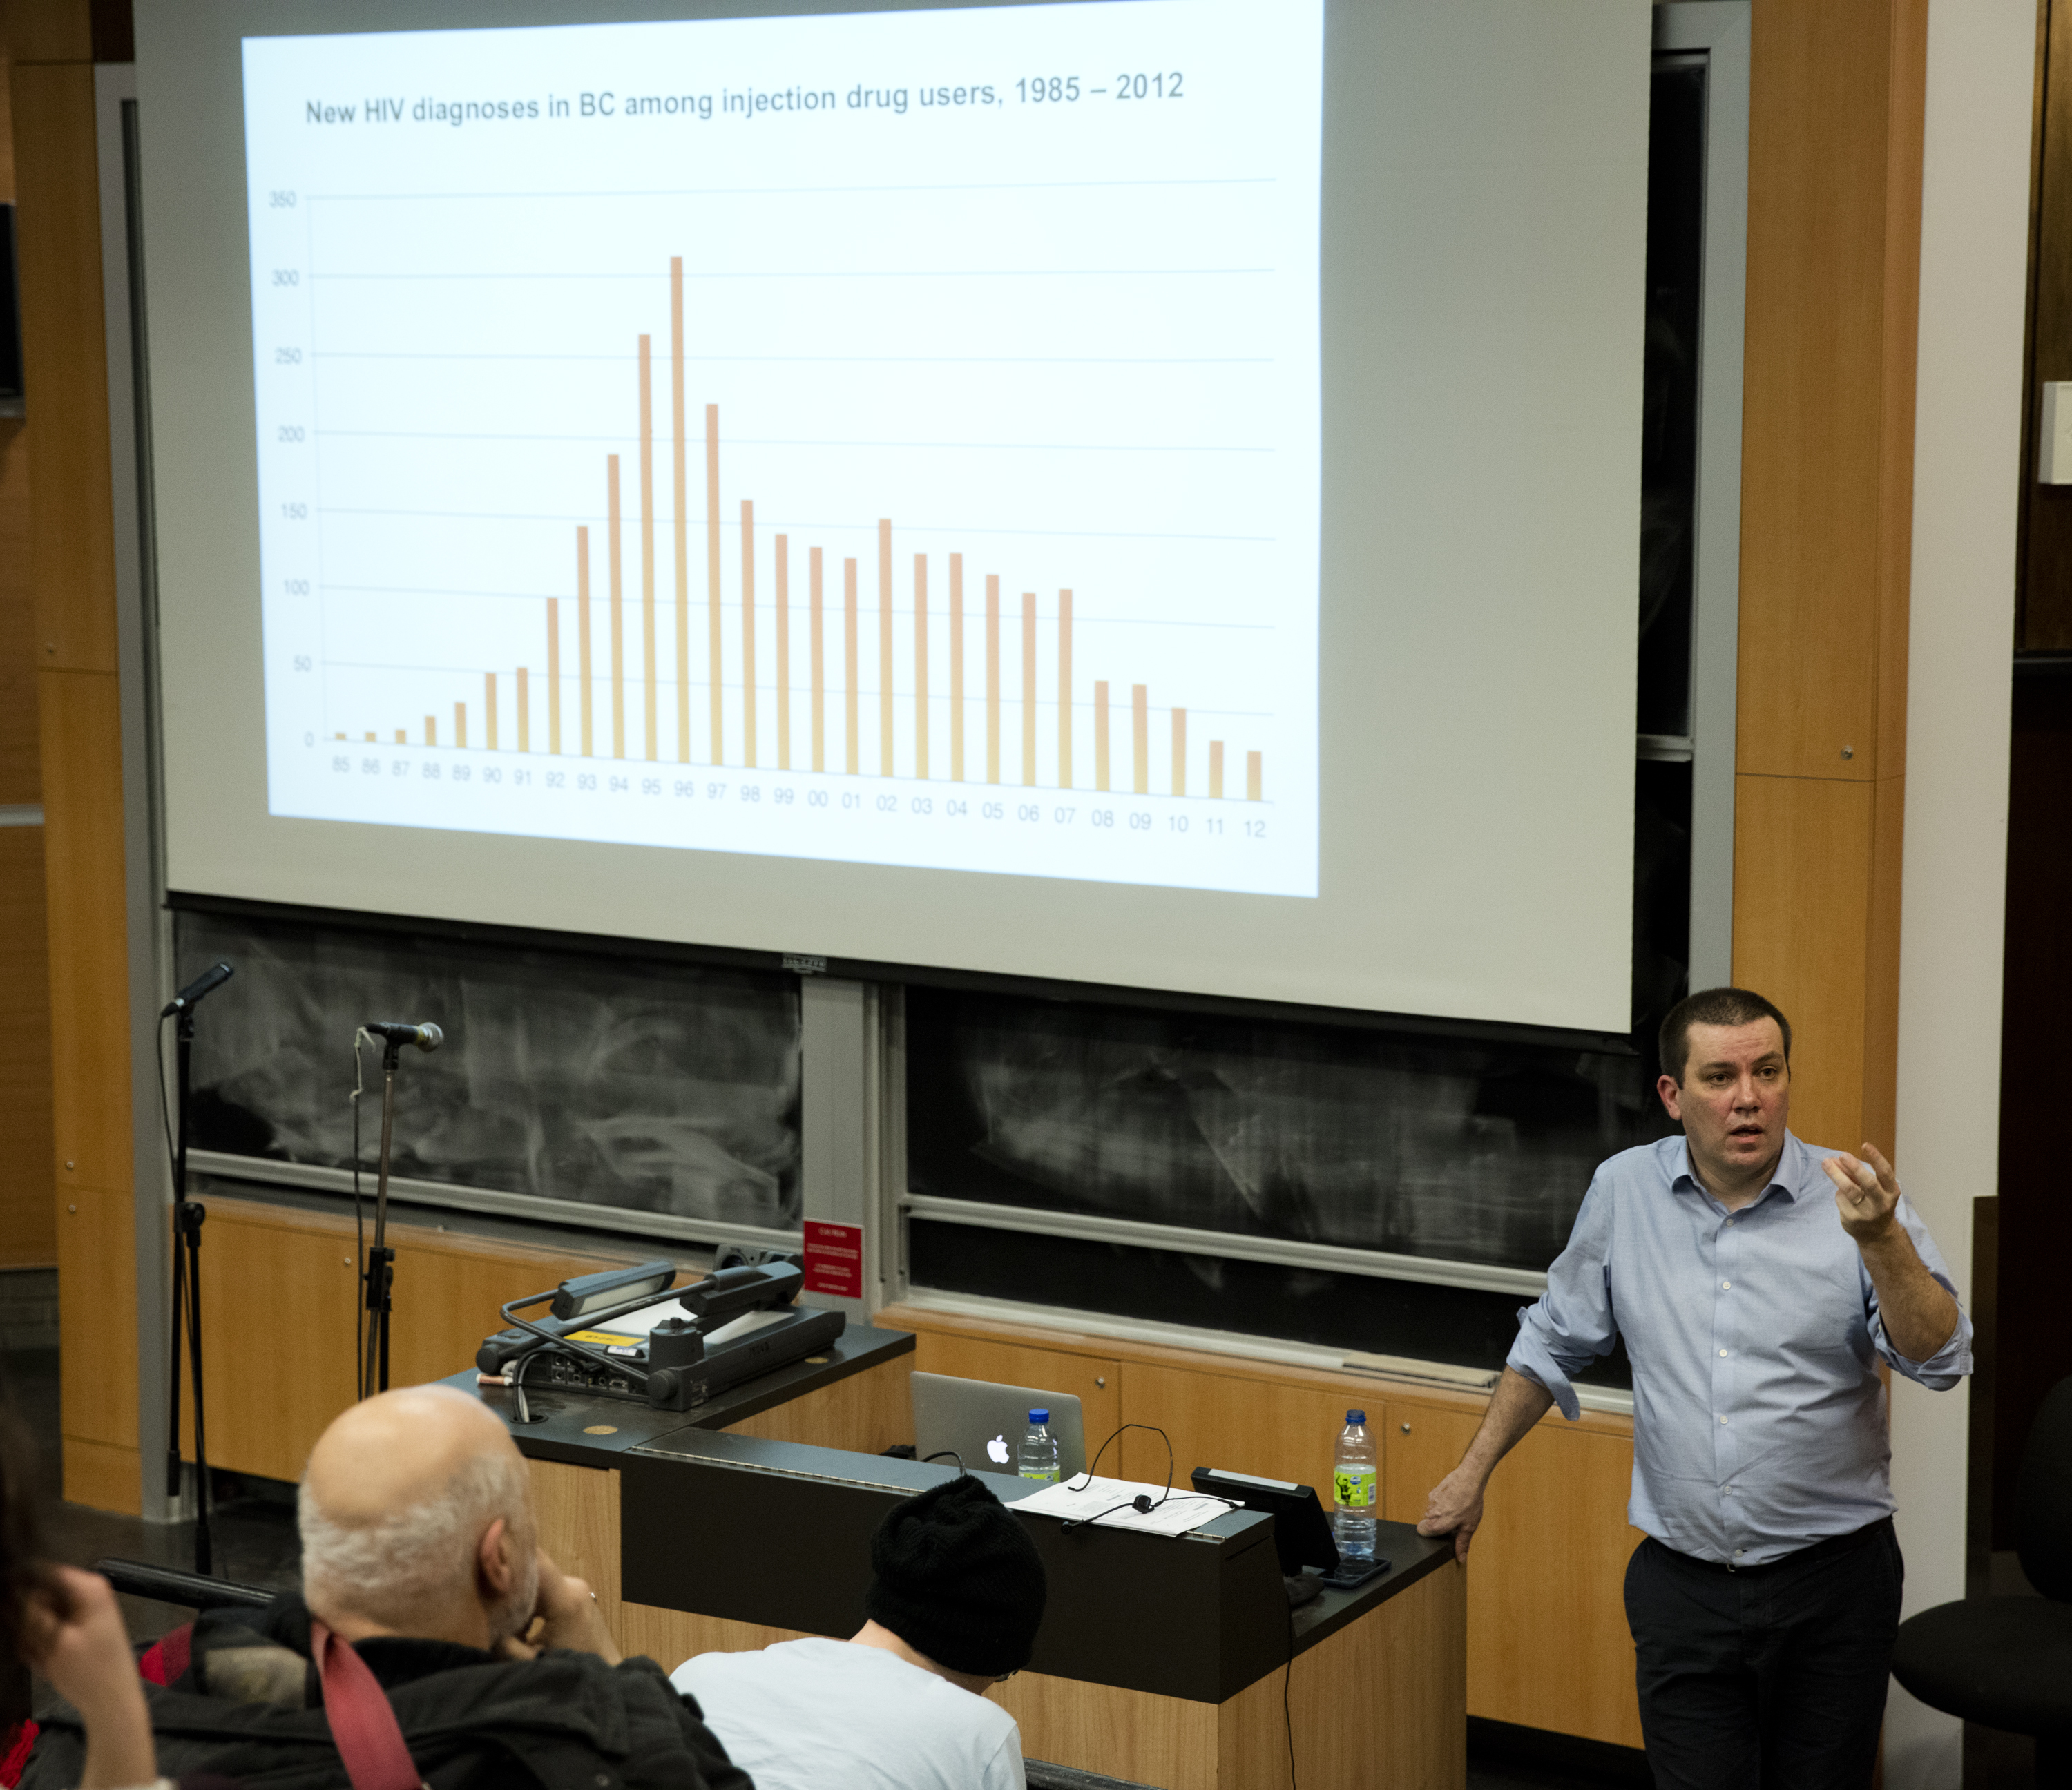 M.J. Milloy discusses ending HIV in the Leacock building at McGill University. Photo by Marie-Pierre Savard.